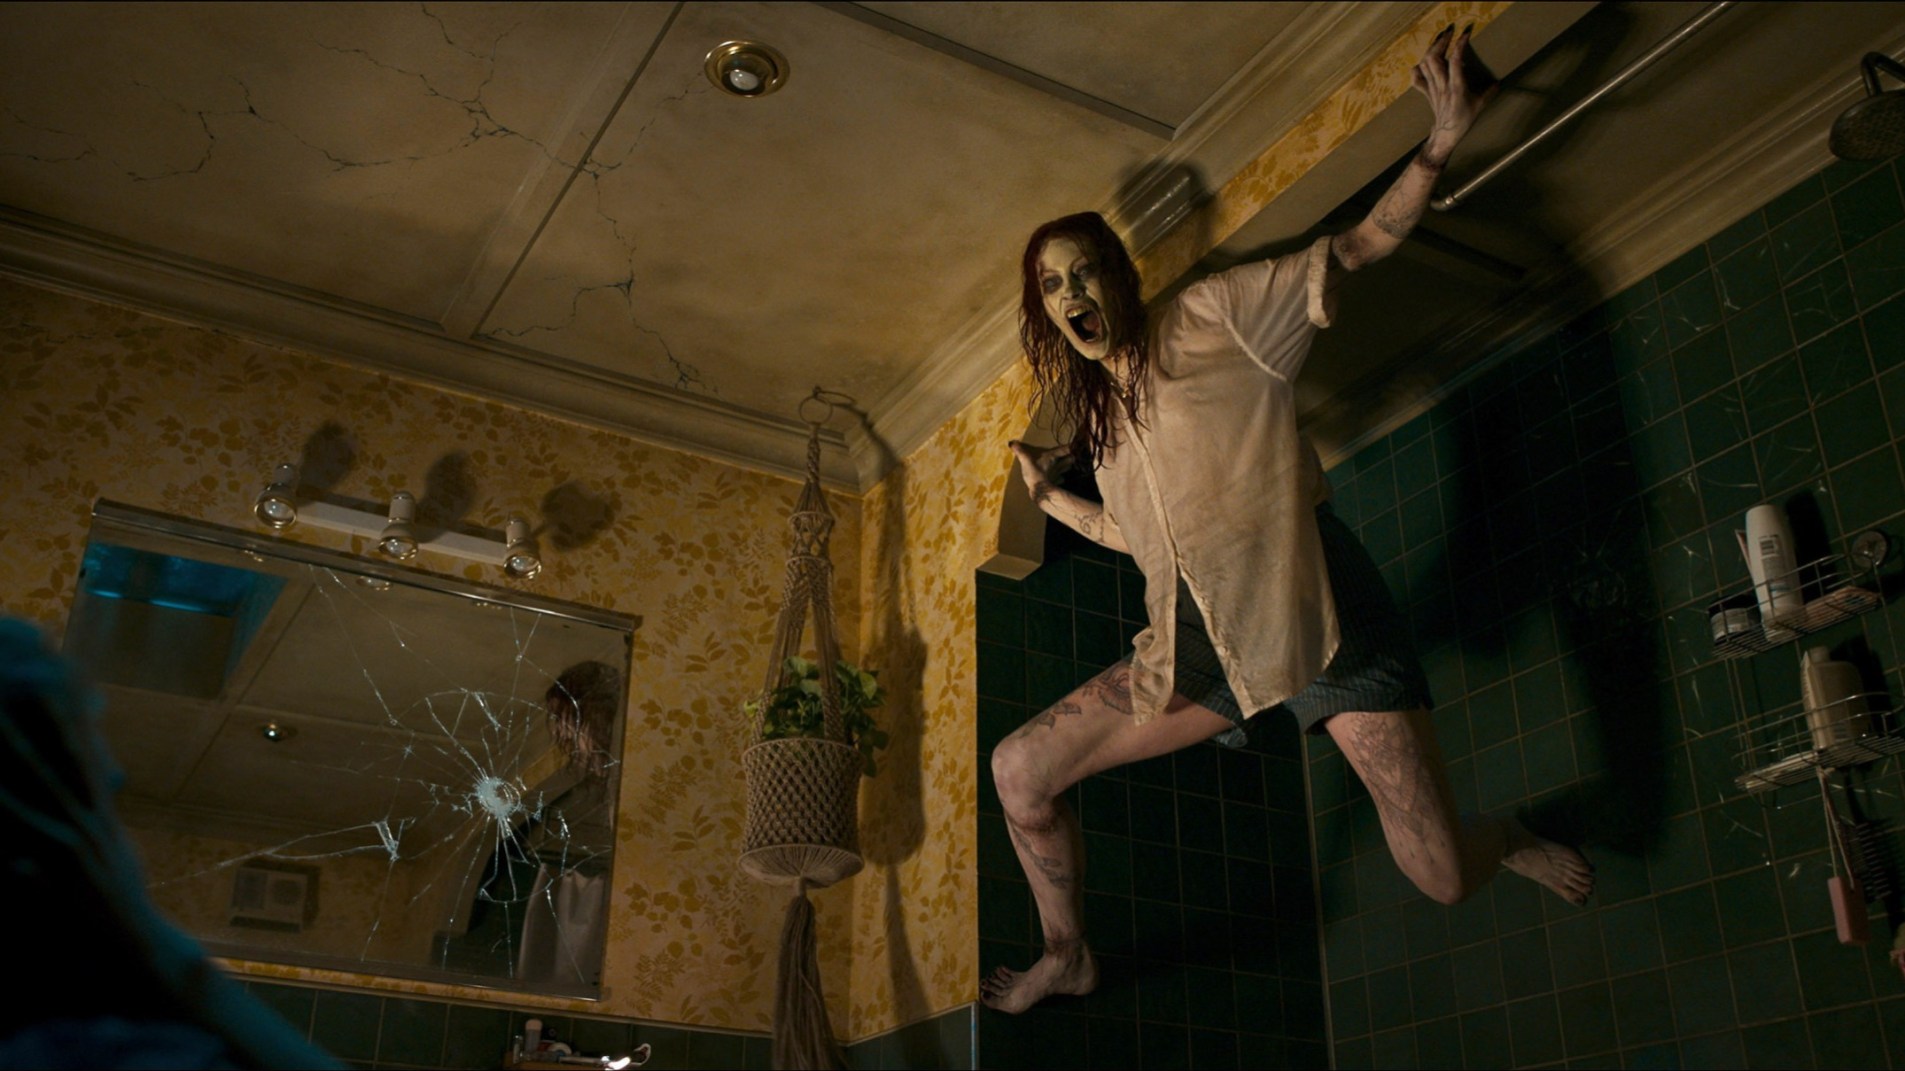 the villain of the new evil dead movie, a deadite on the ceiling